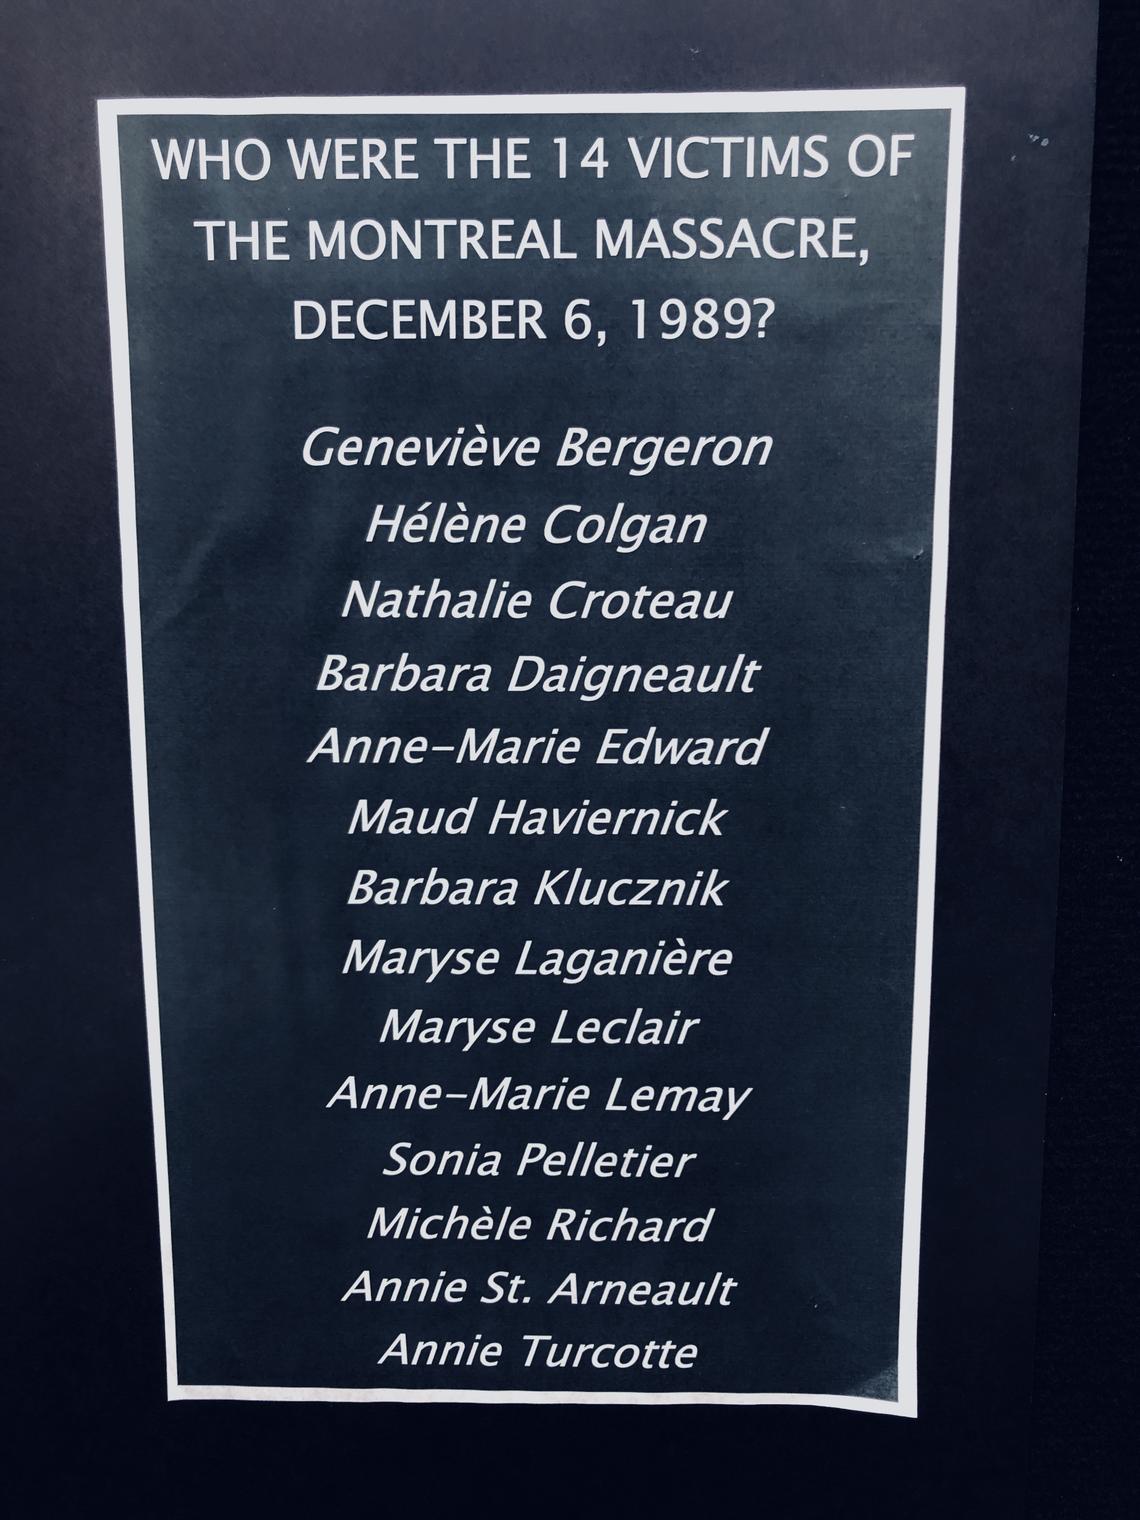 The names of those who died at Montreal’s École Polytechnique.